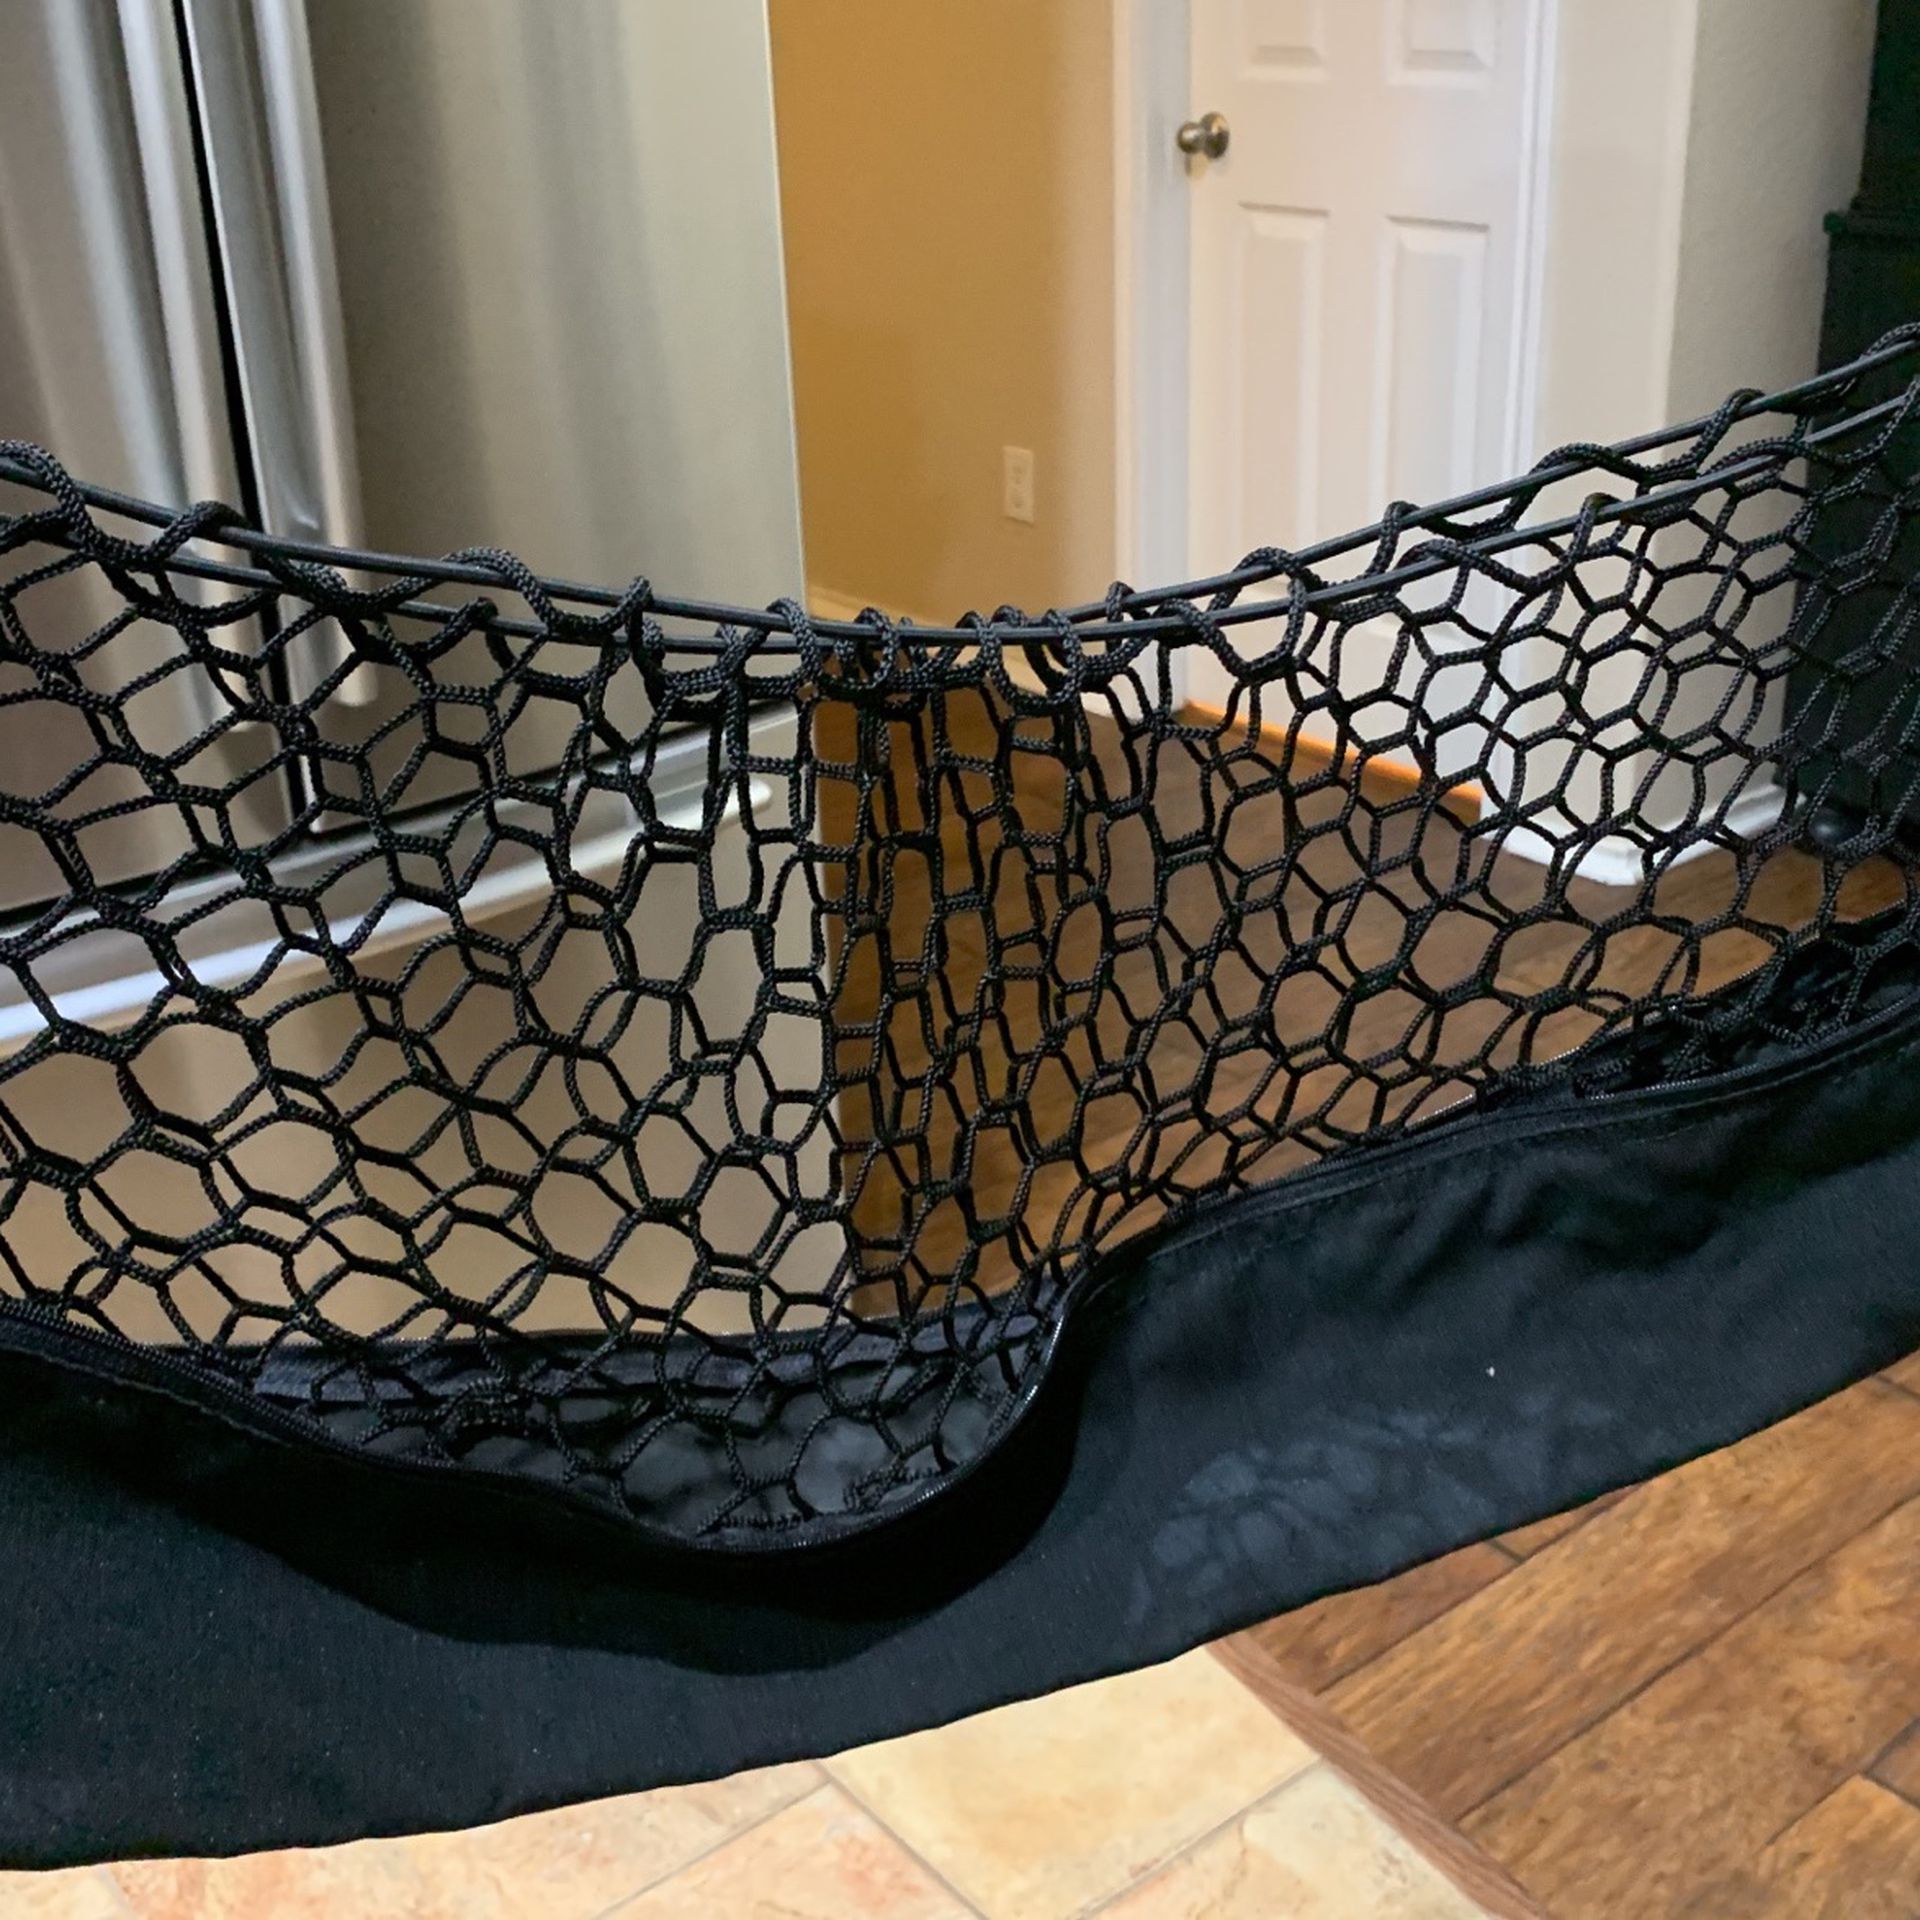 Cargo Net For Suv Gmc Or Chevy